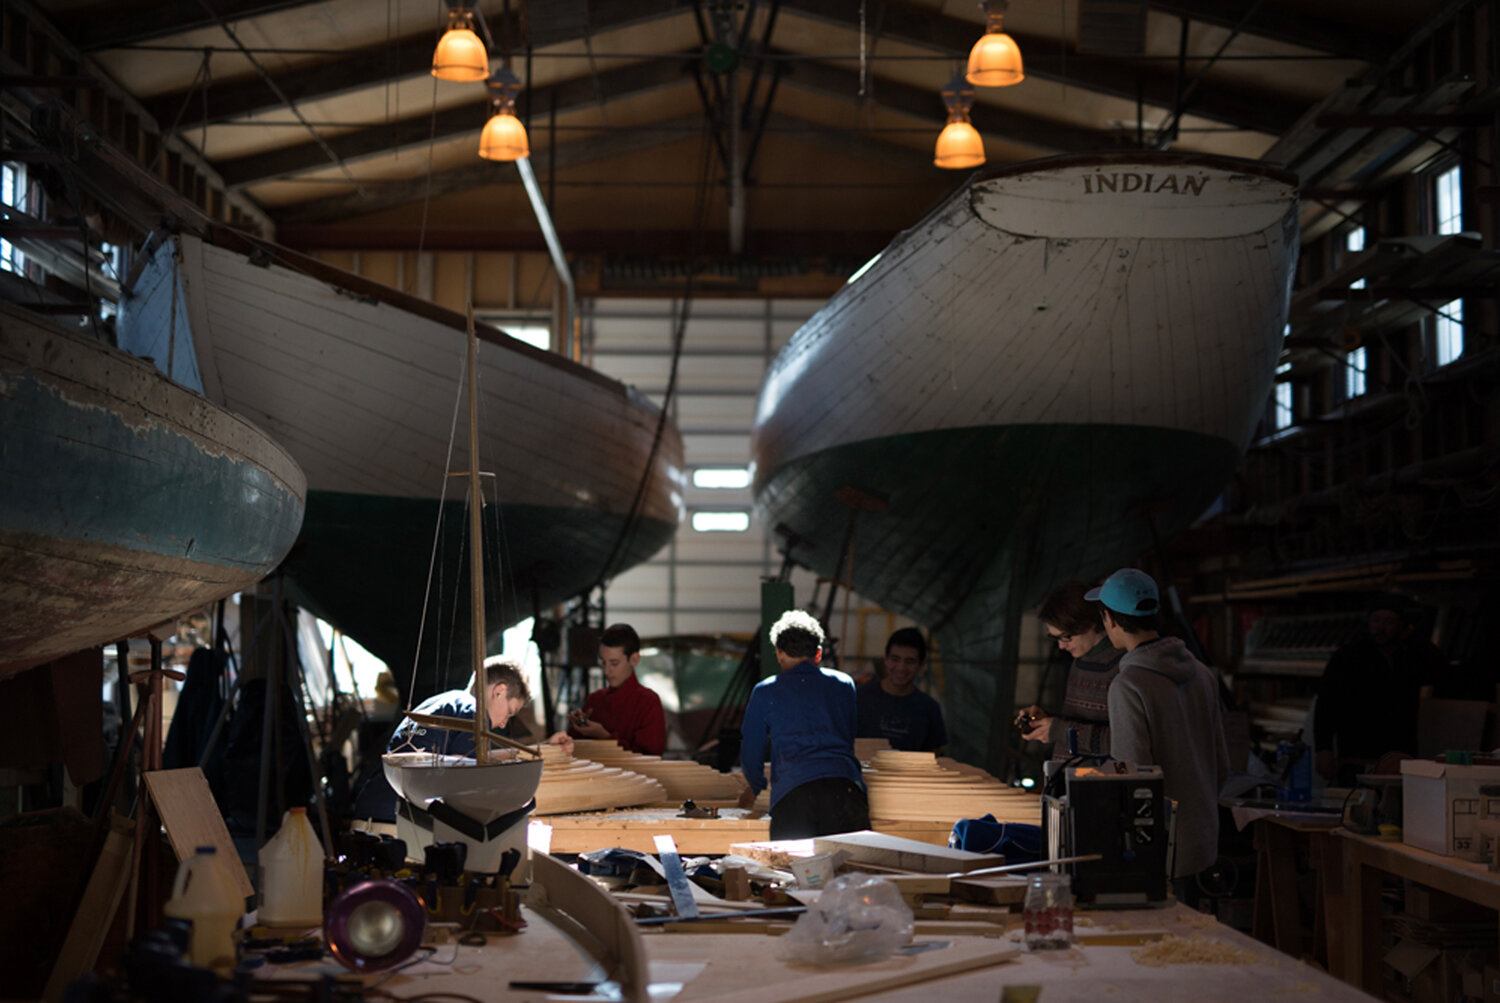 visiting the herreshoff by boat? dockage and moorings are available at the waterfront facility